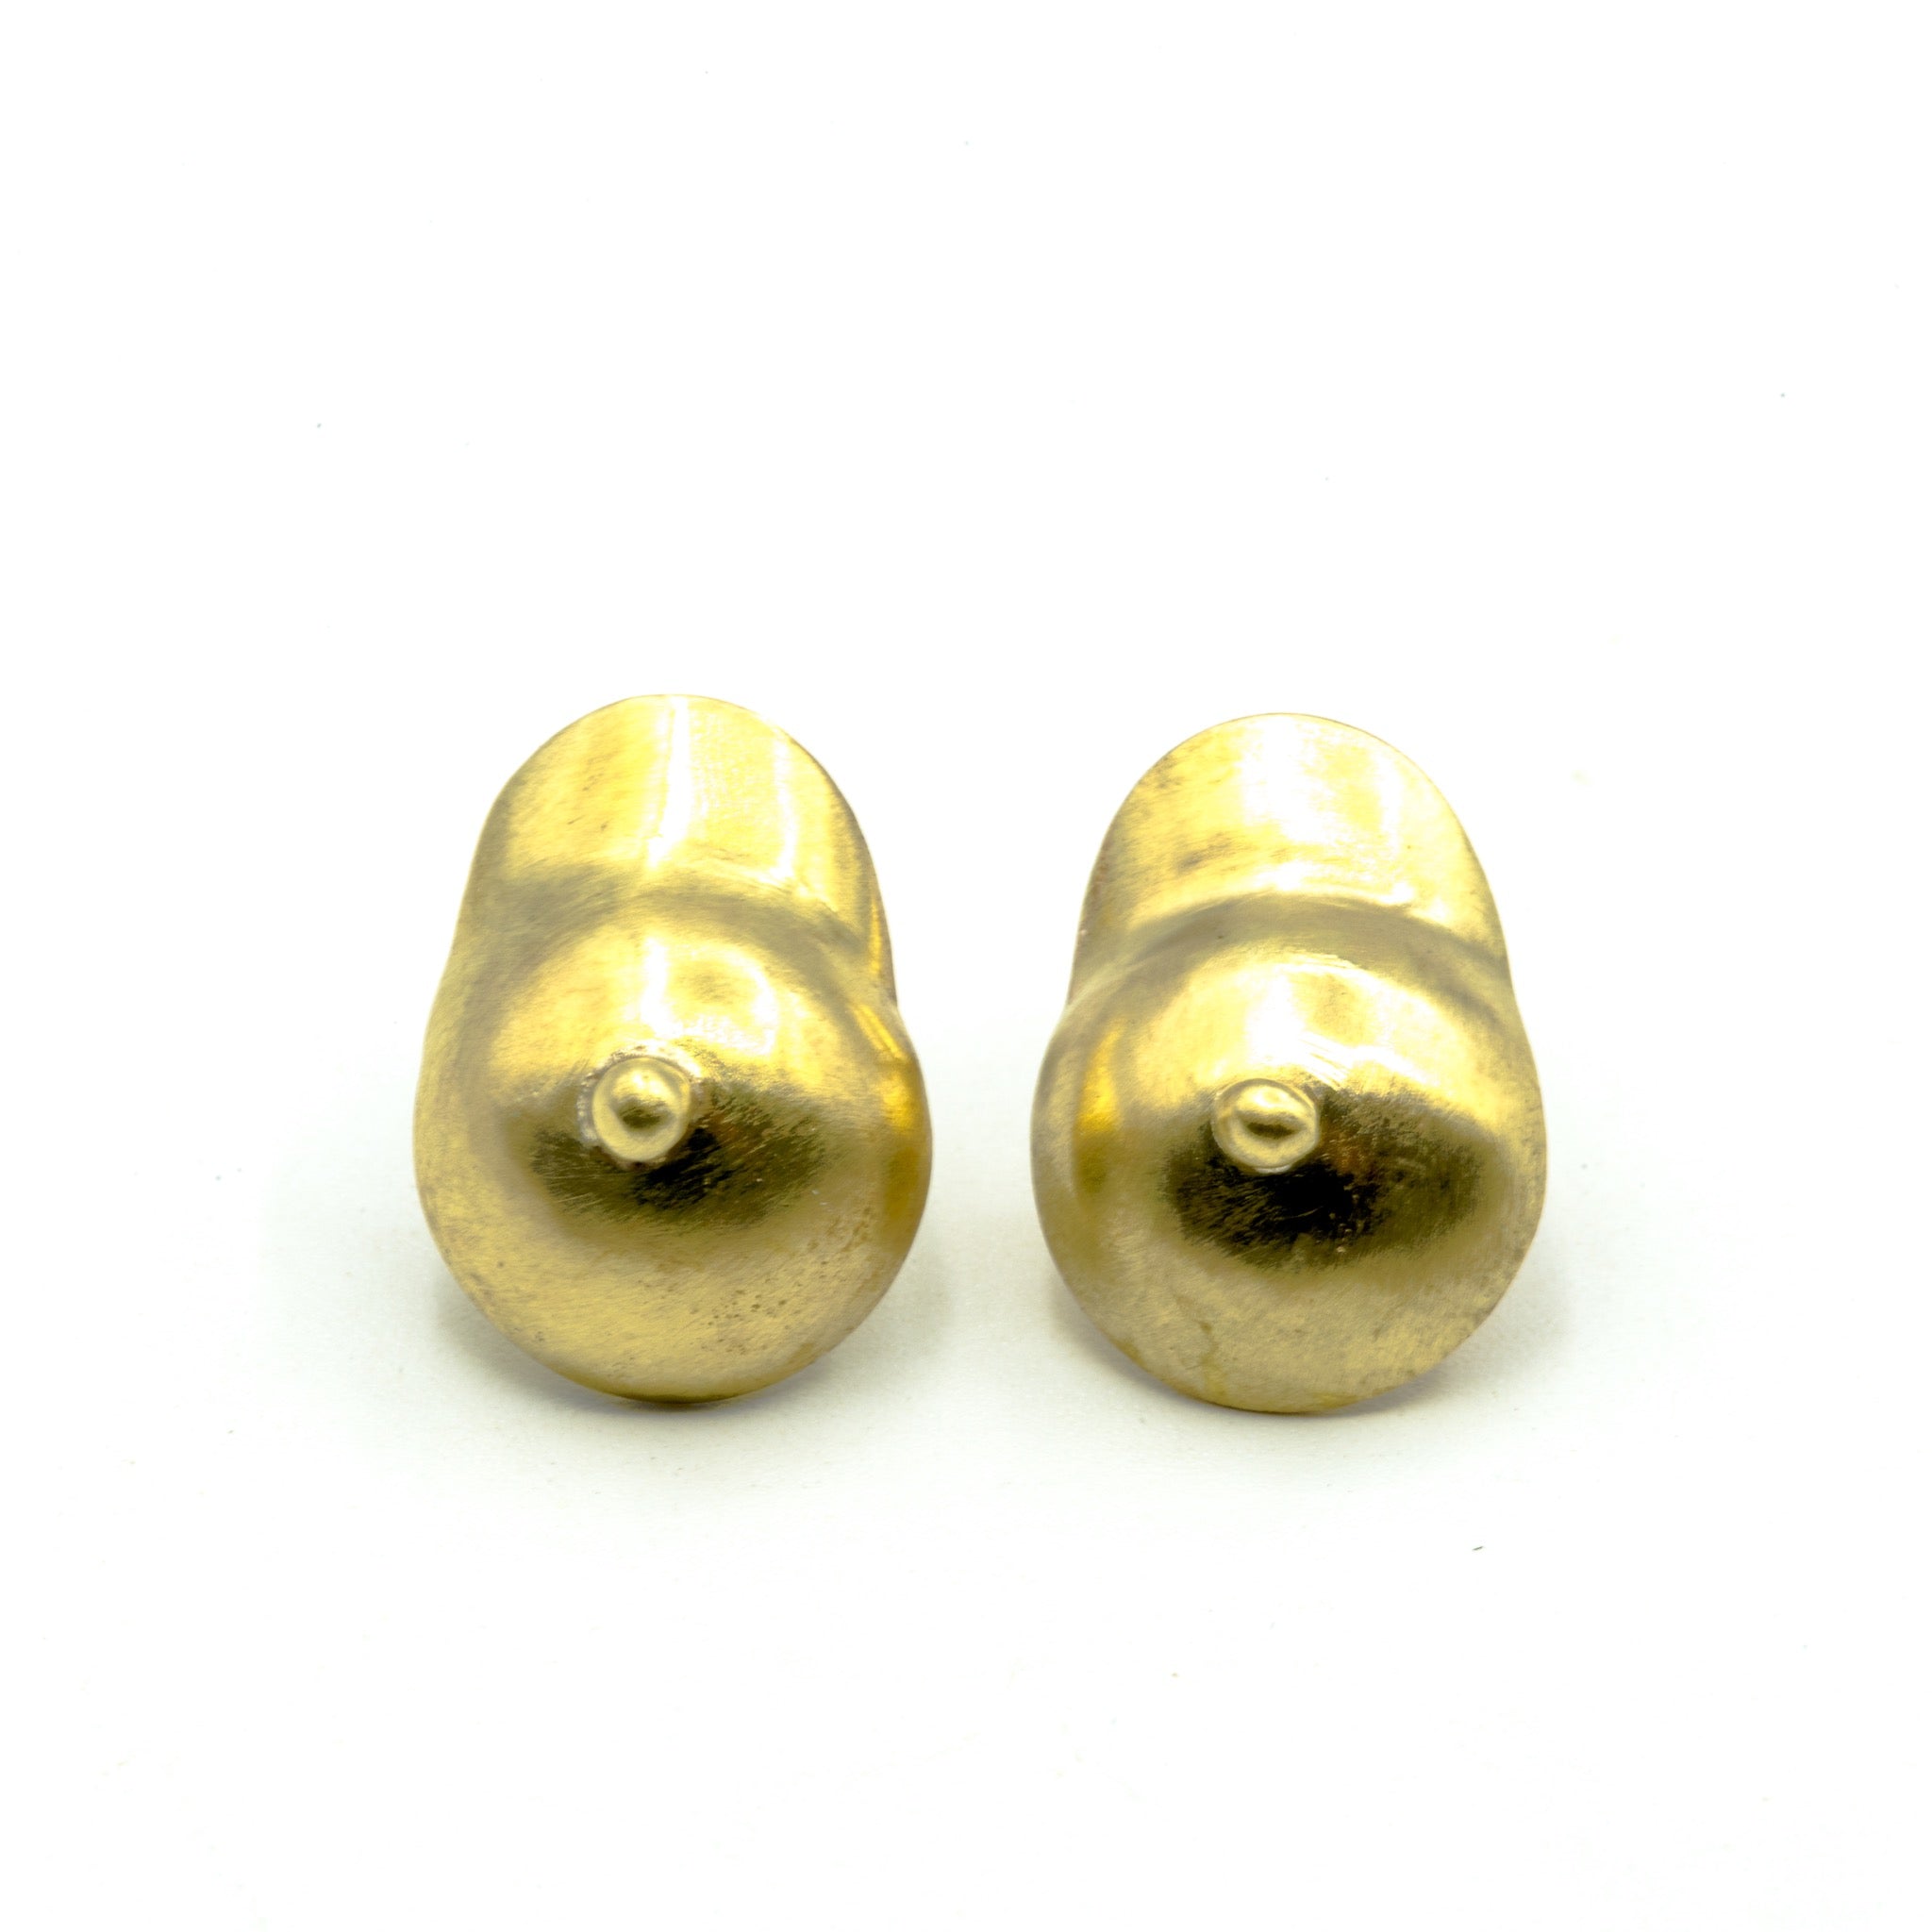 boobie shaped brass earrings on which background